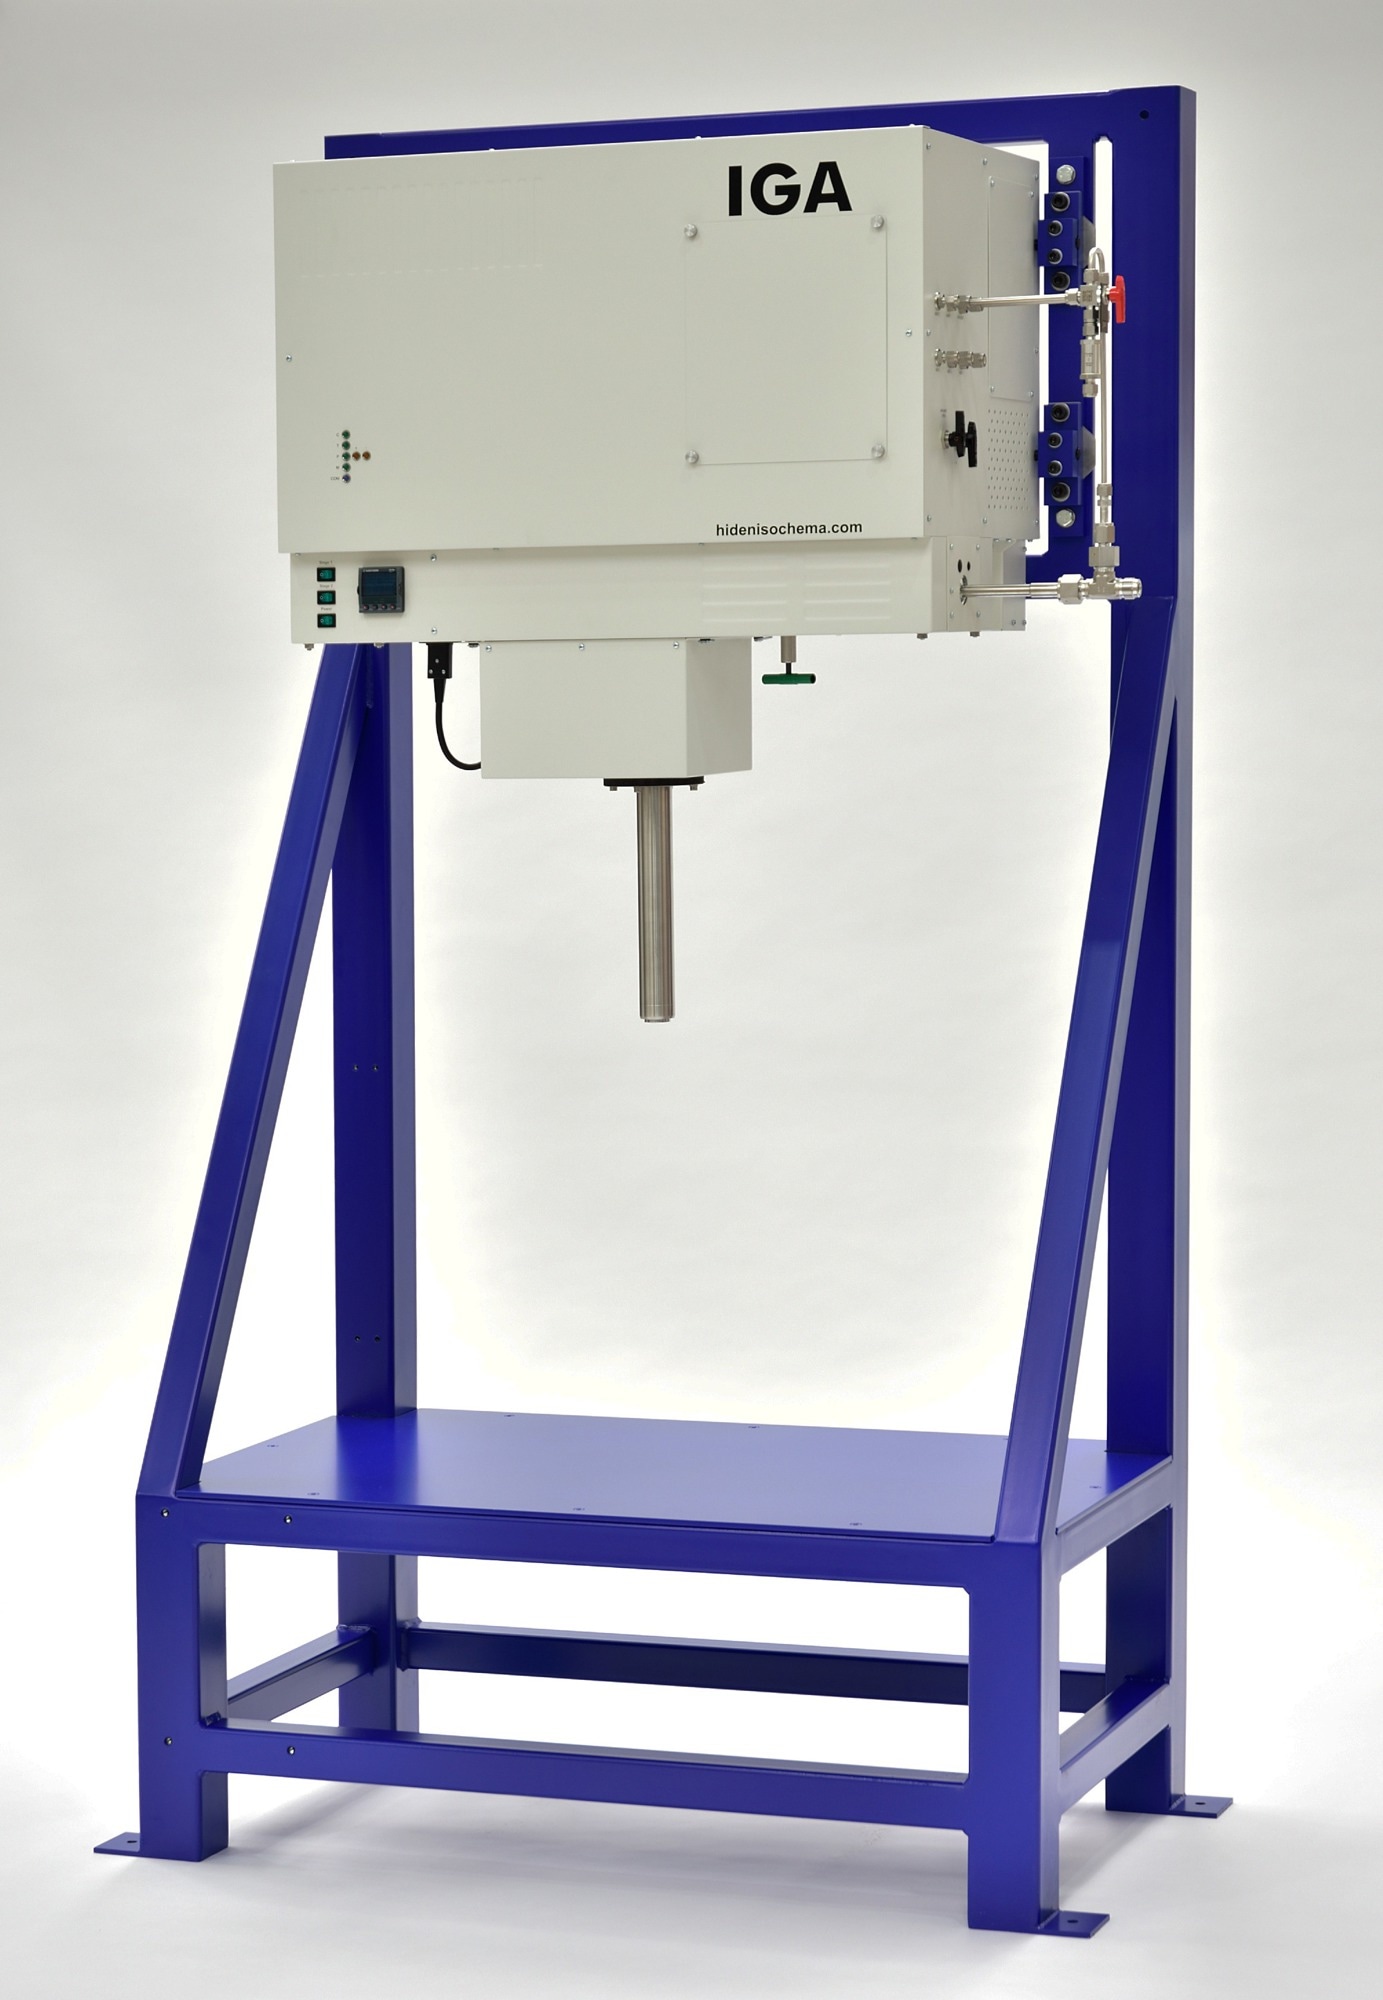 The IGA-003: Designed for the Analysis of Mixed Gas and Vapor Sorption